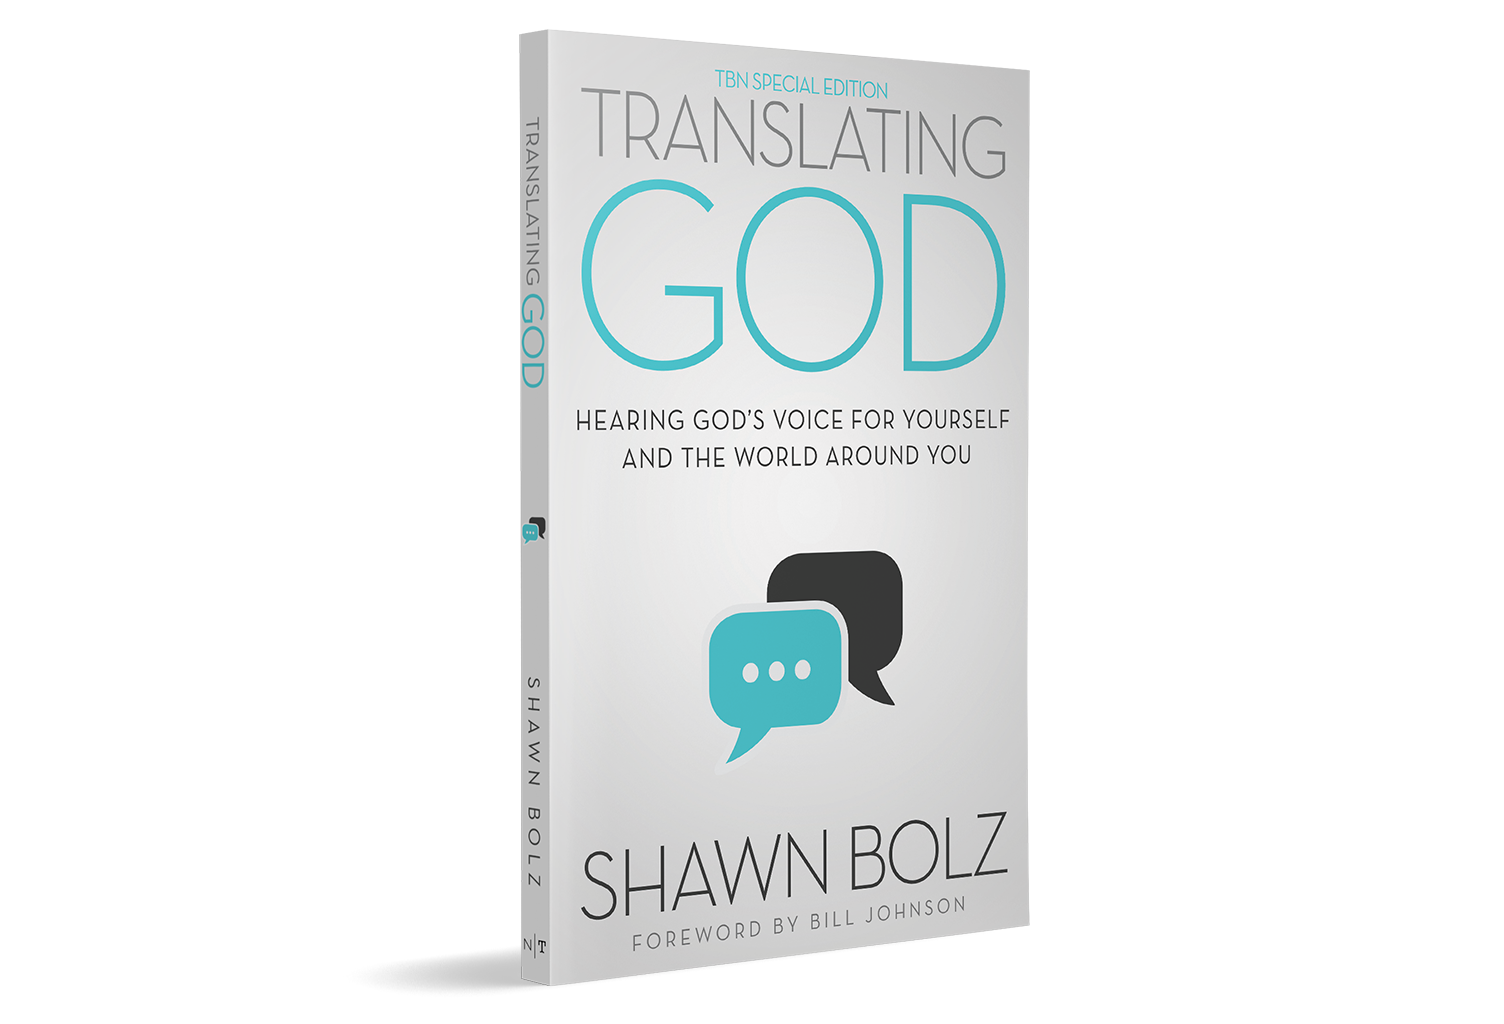 Receive Translating God: Hearing God’s Voice for Yourself and the World Around You, by Shawn Bolz from TBN